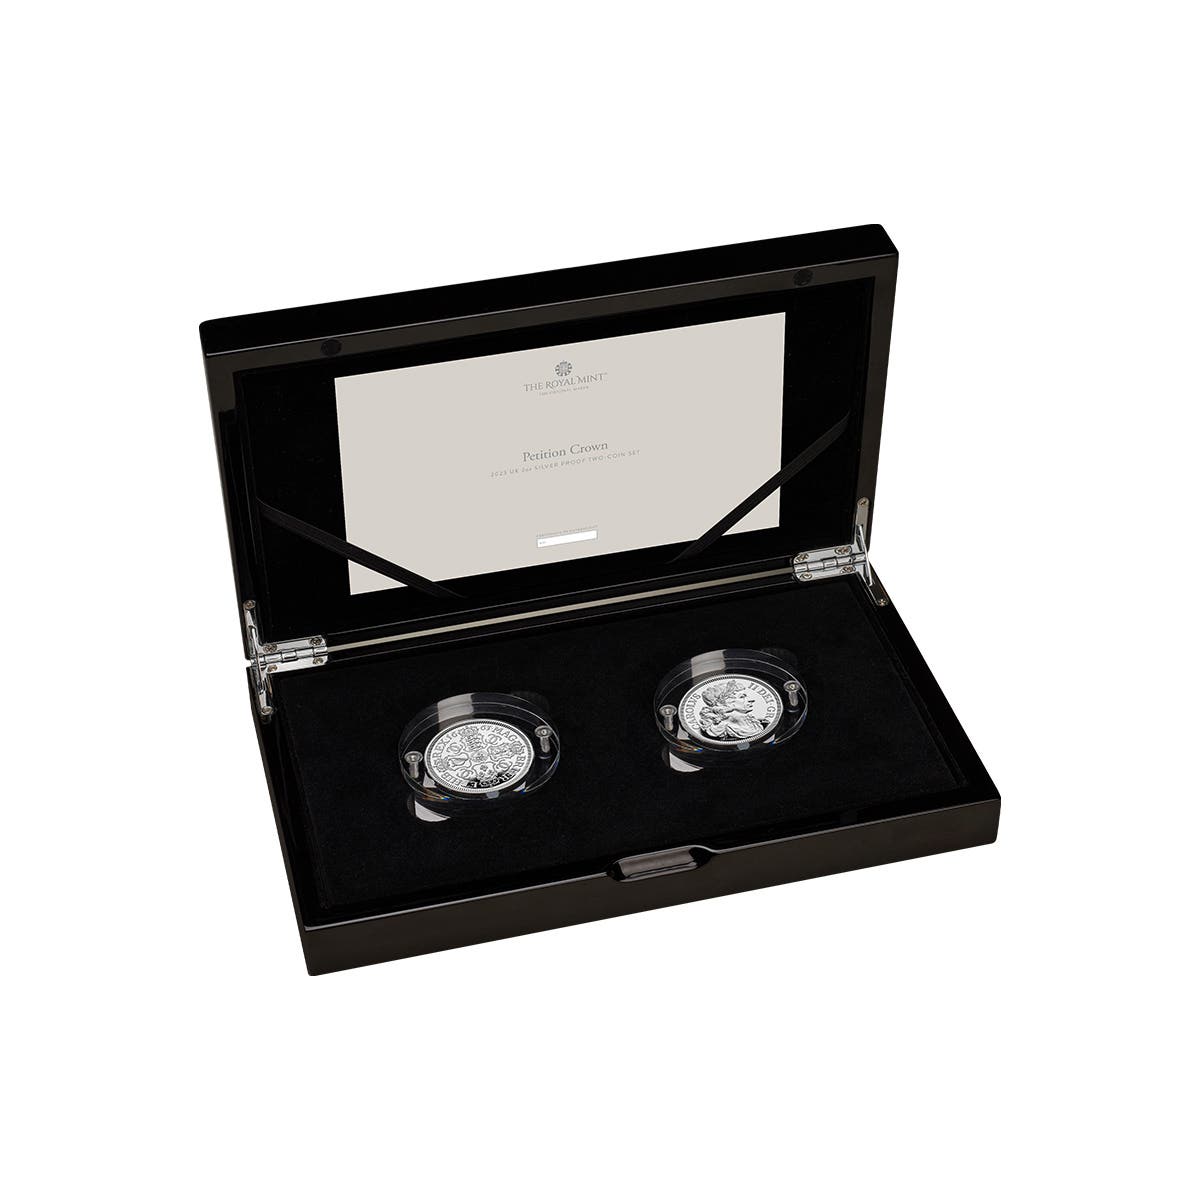 Great Engravers Petition Crown 2023 UK 2oz Silver Proof Two-Coin Set